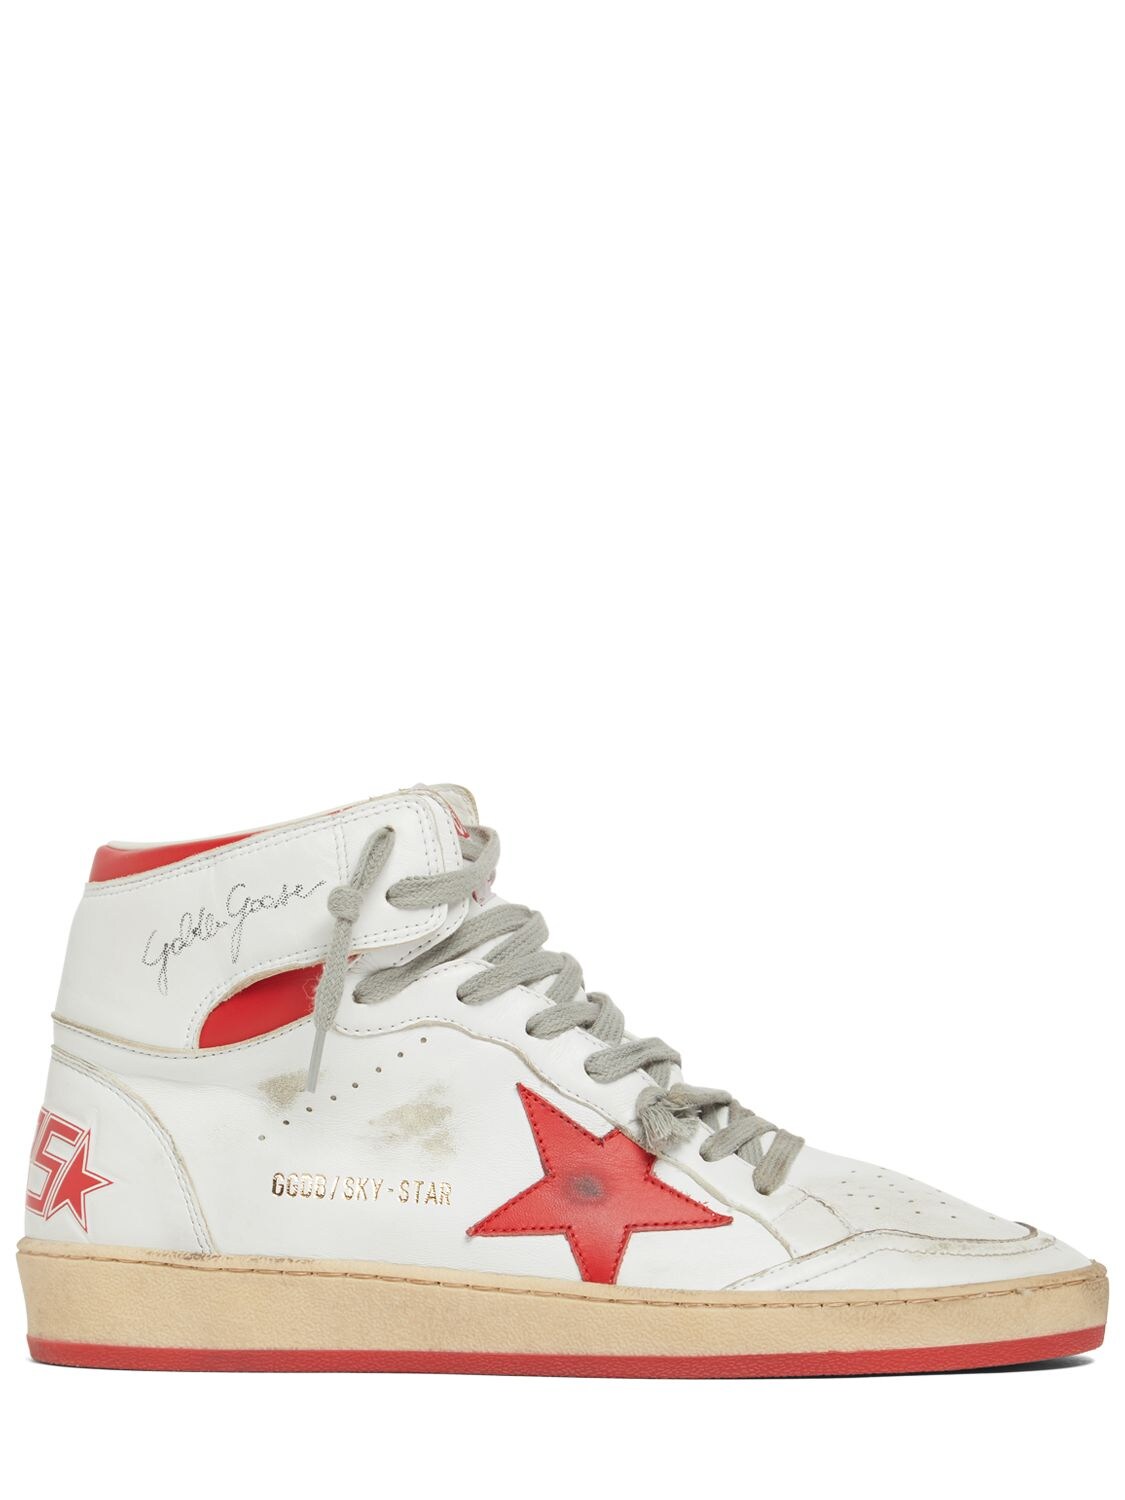 GOLDEN GOOSE 20MM SKY STAR NAPPA LEATHER SNEAKERS